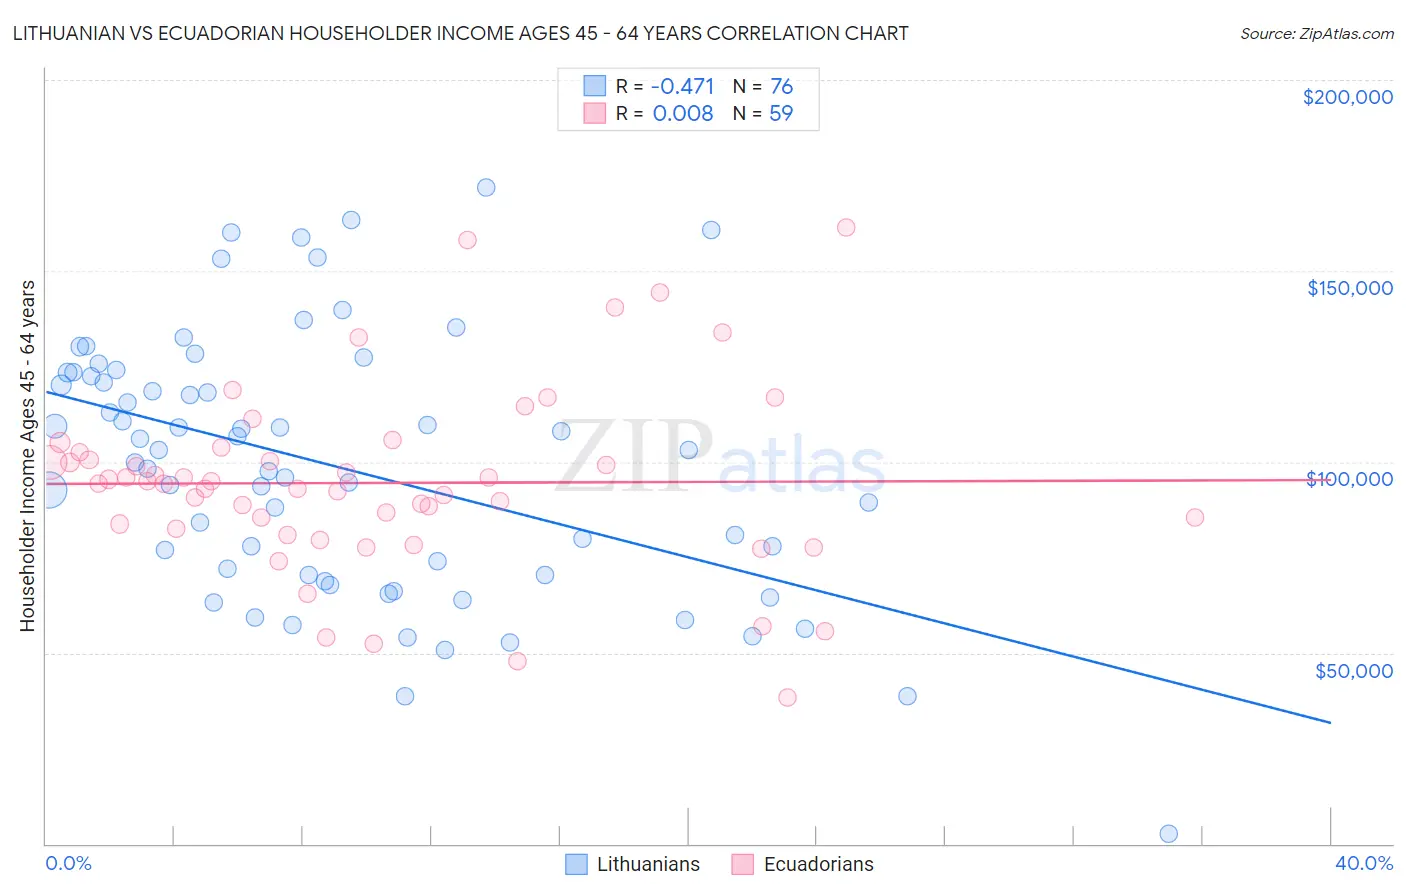 Lithuanian vs Ecuadorian Householder Income Ages 45 - 64 years